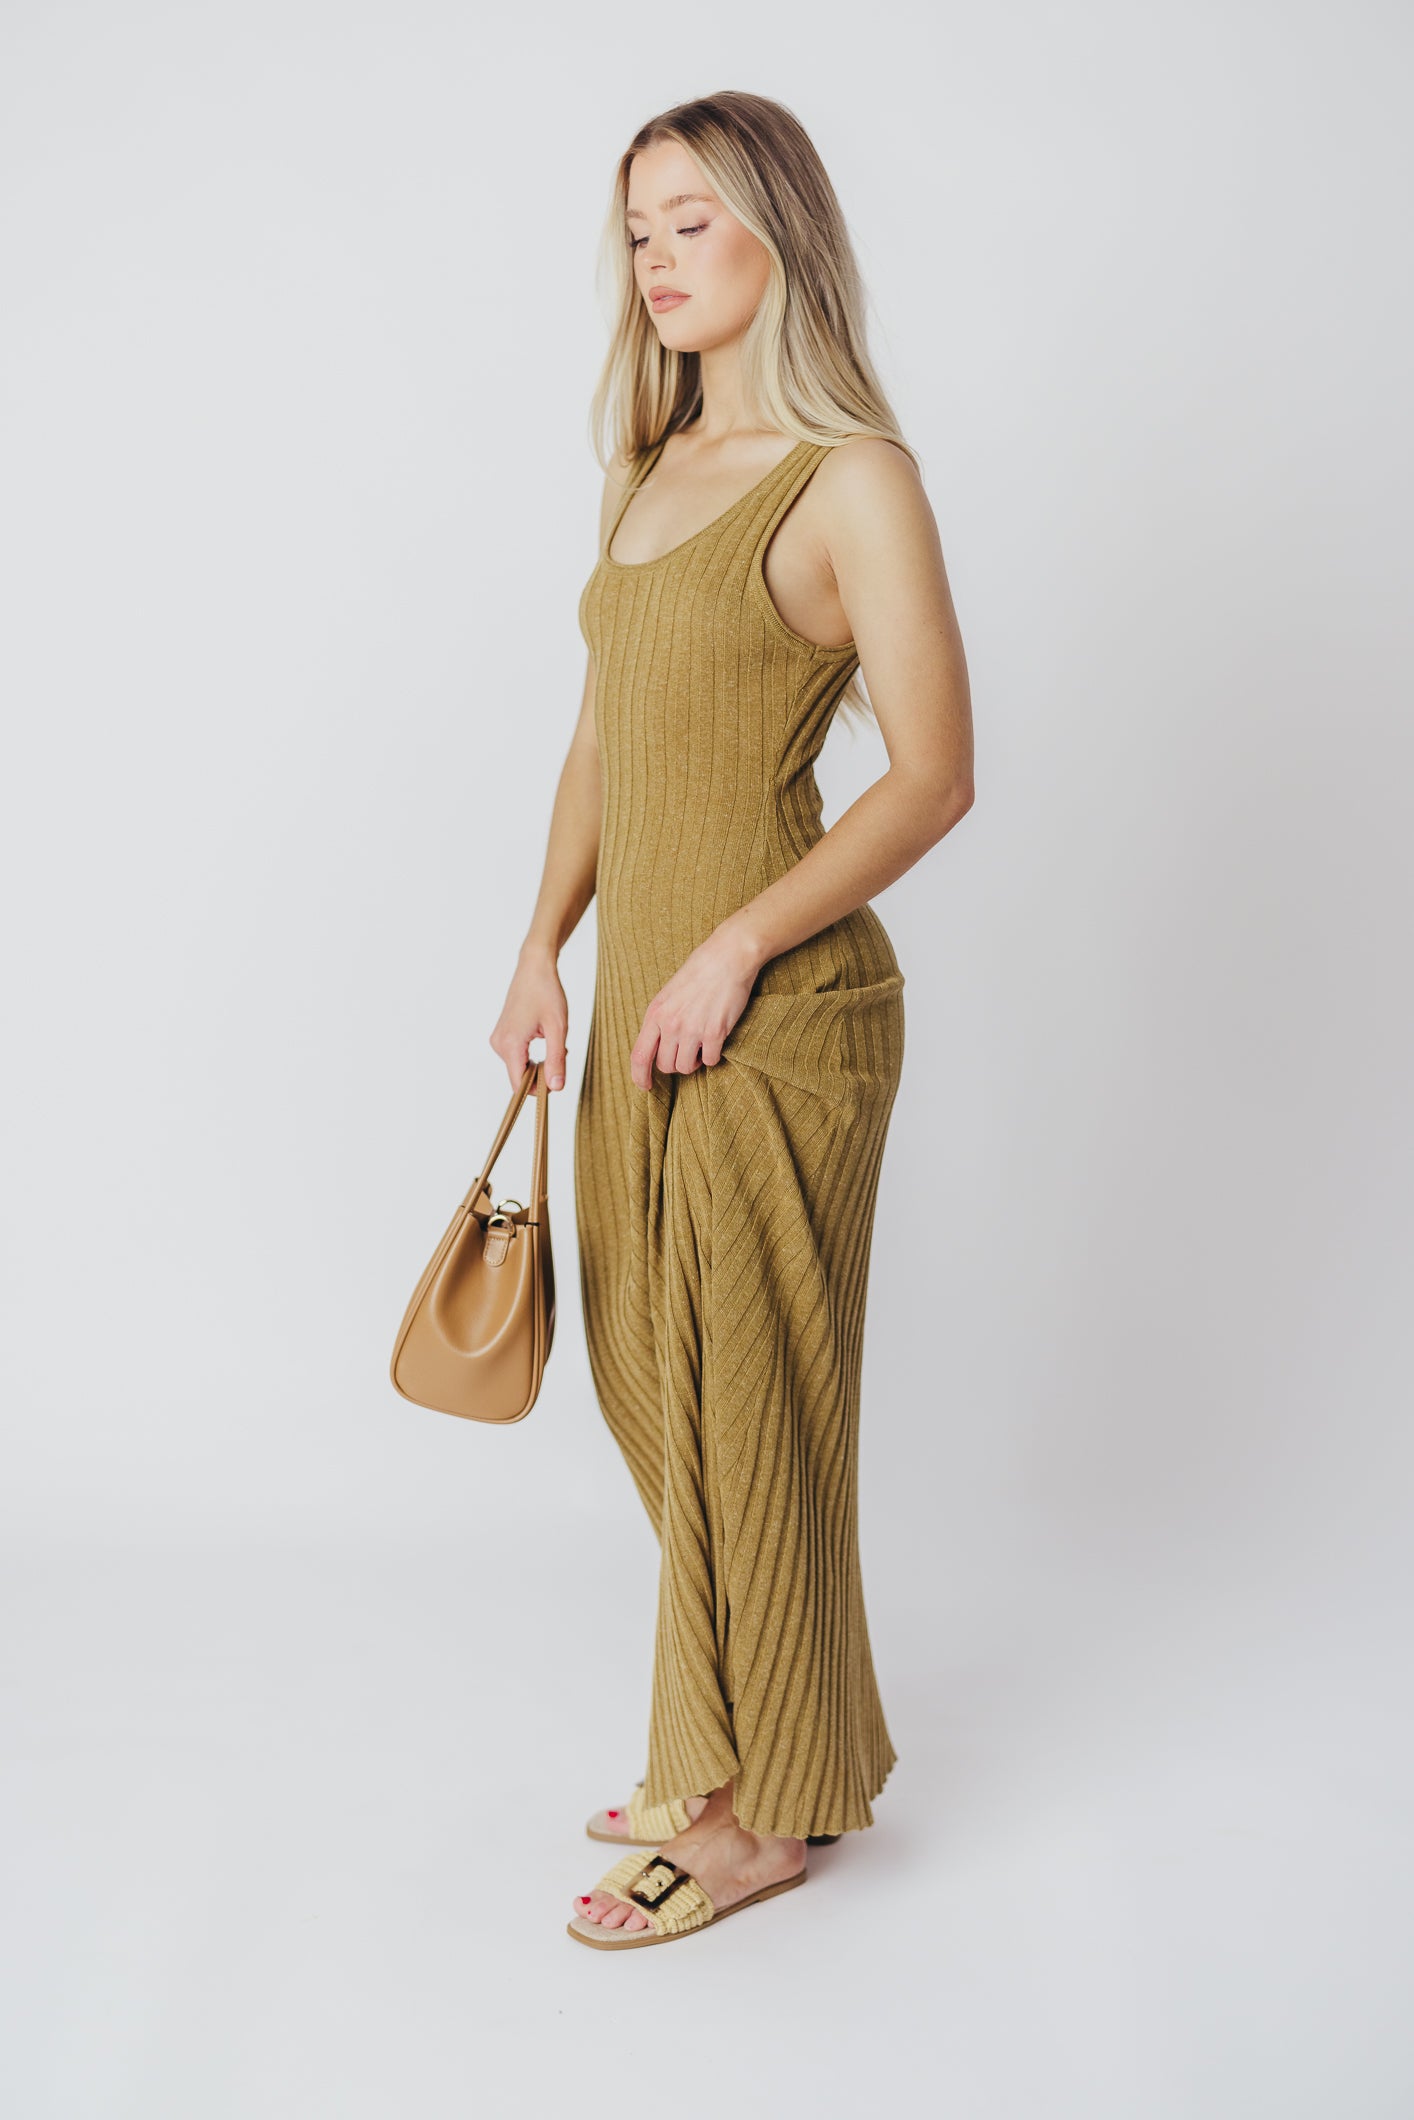 Gidea Knit Maxi Dress in Brown Olive